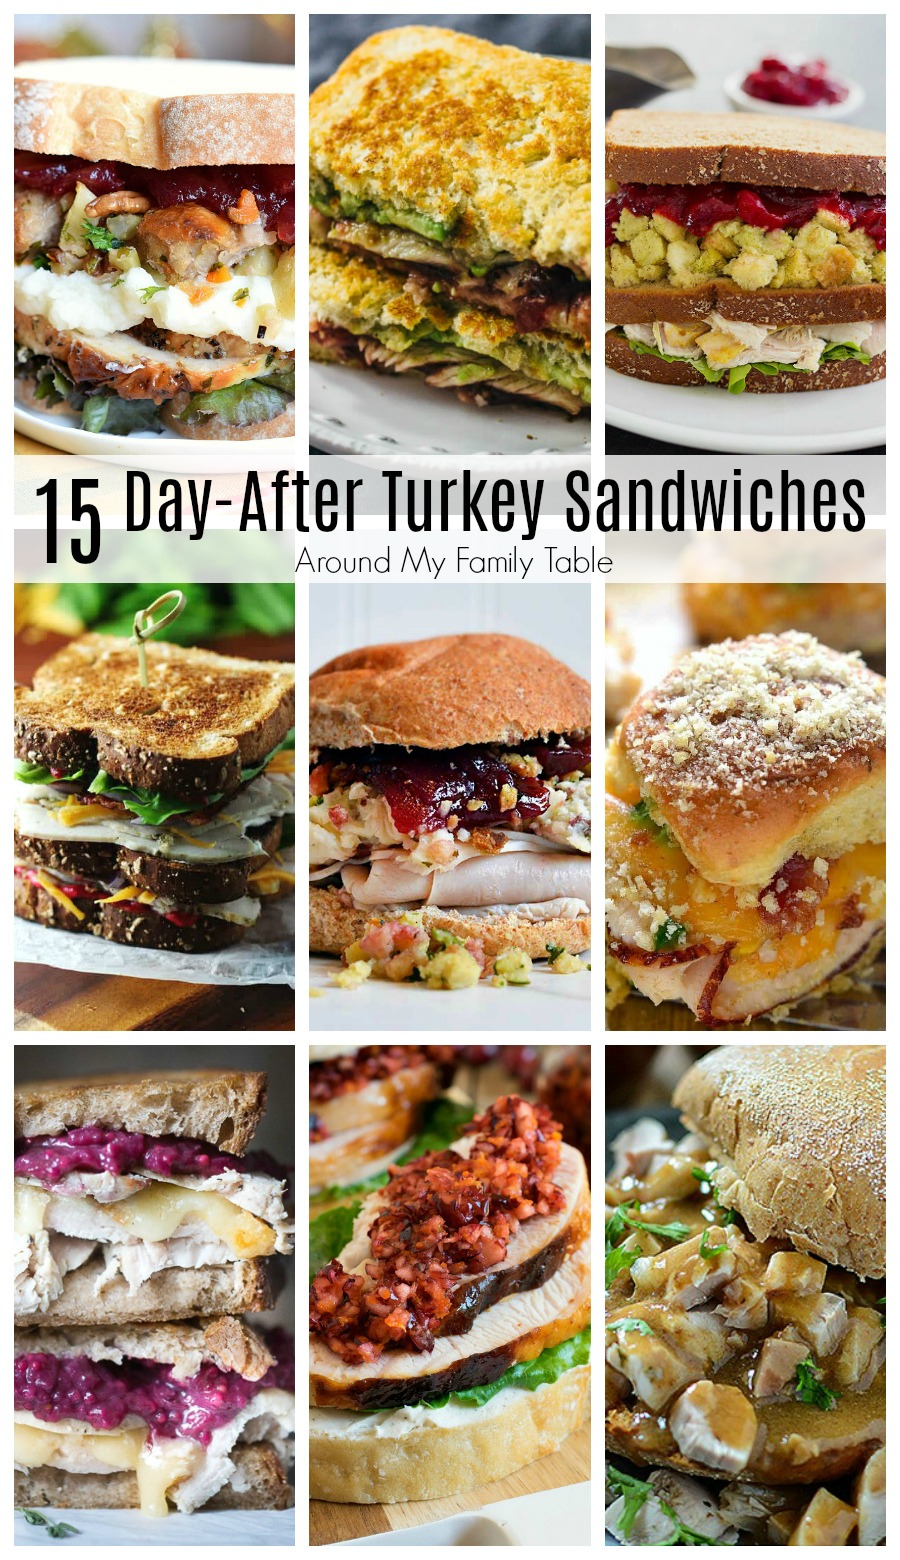 Got leftover turkey? Check out my holiday leftover hacks and make these delicious day-after Thanksgiving Sandwiches.